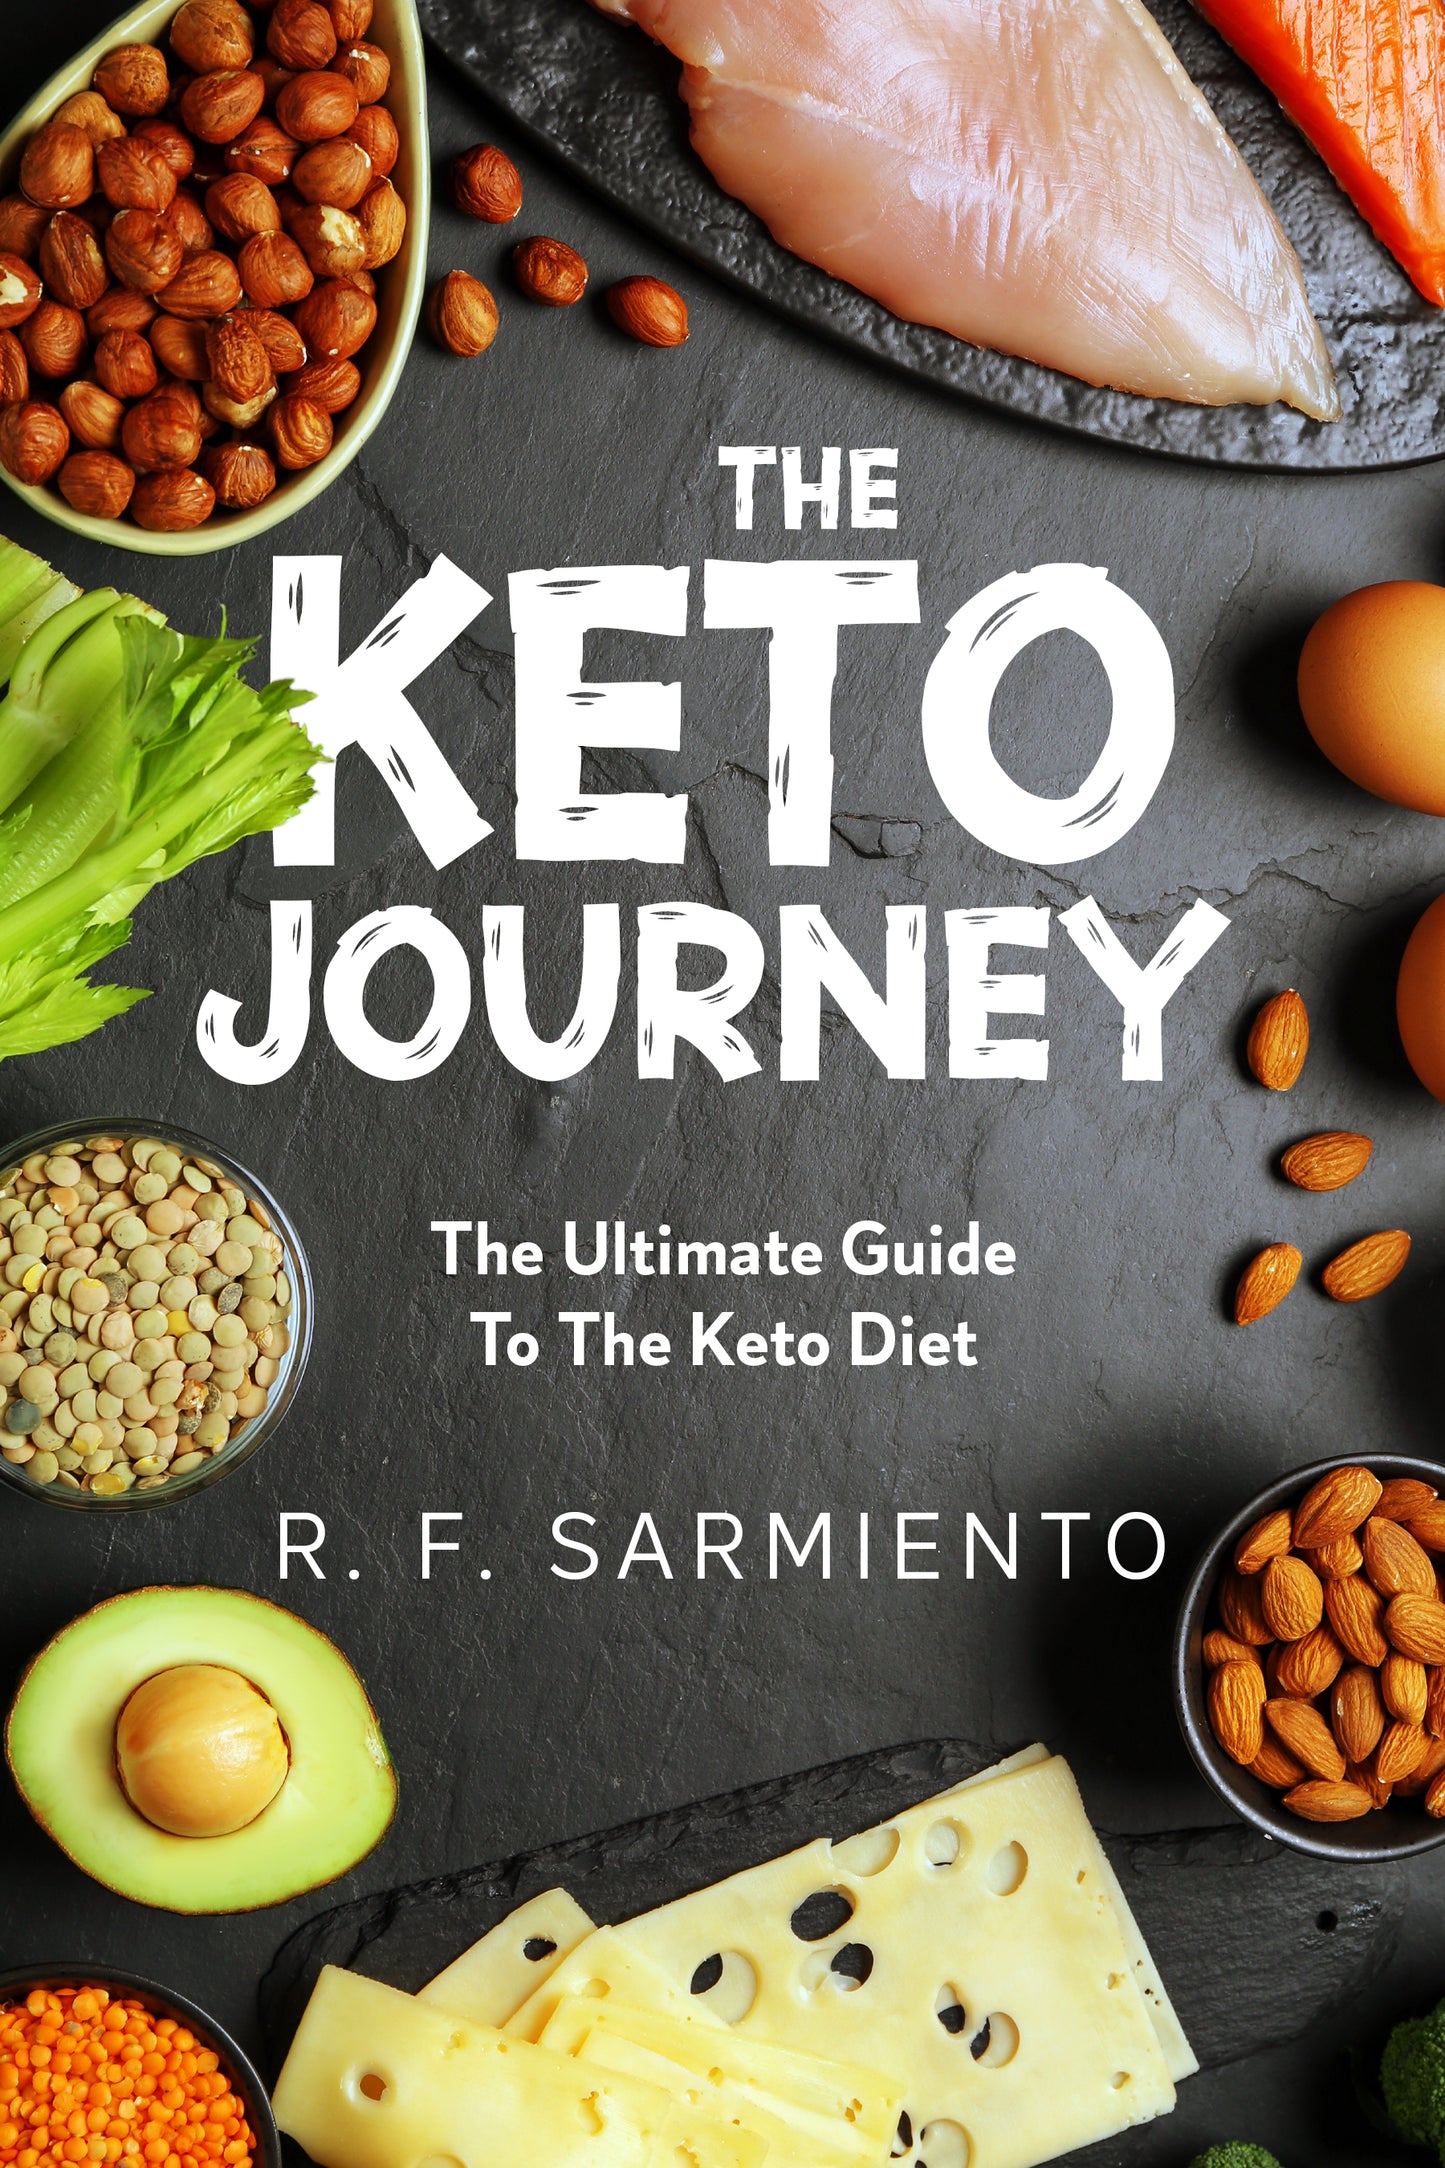 The Keto Journey: The Ultimate Guide to the Keto Diet